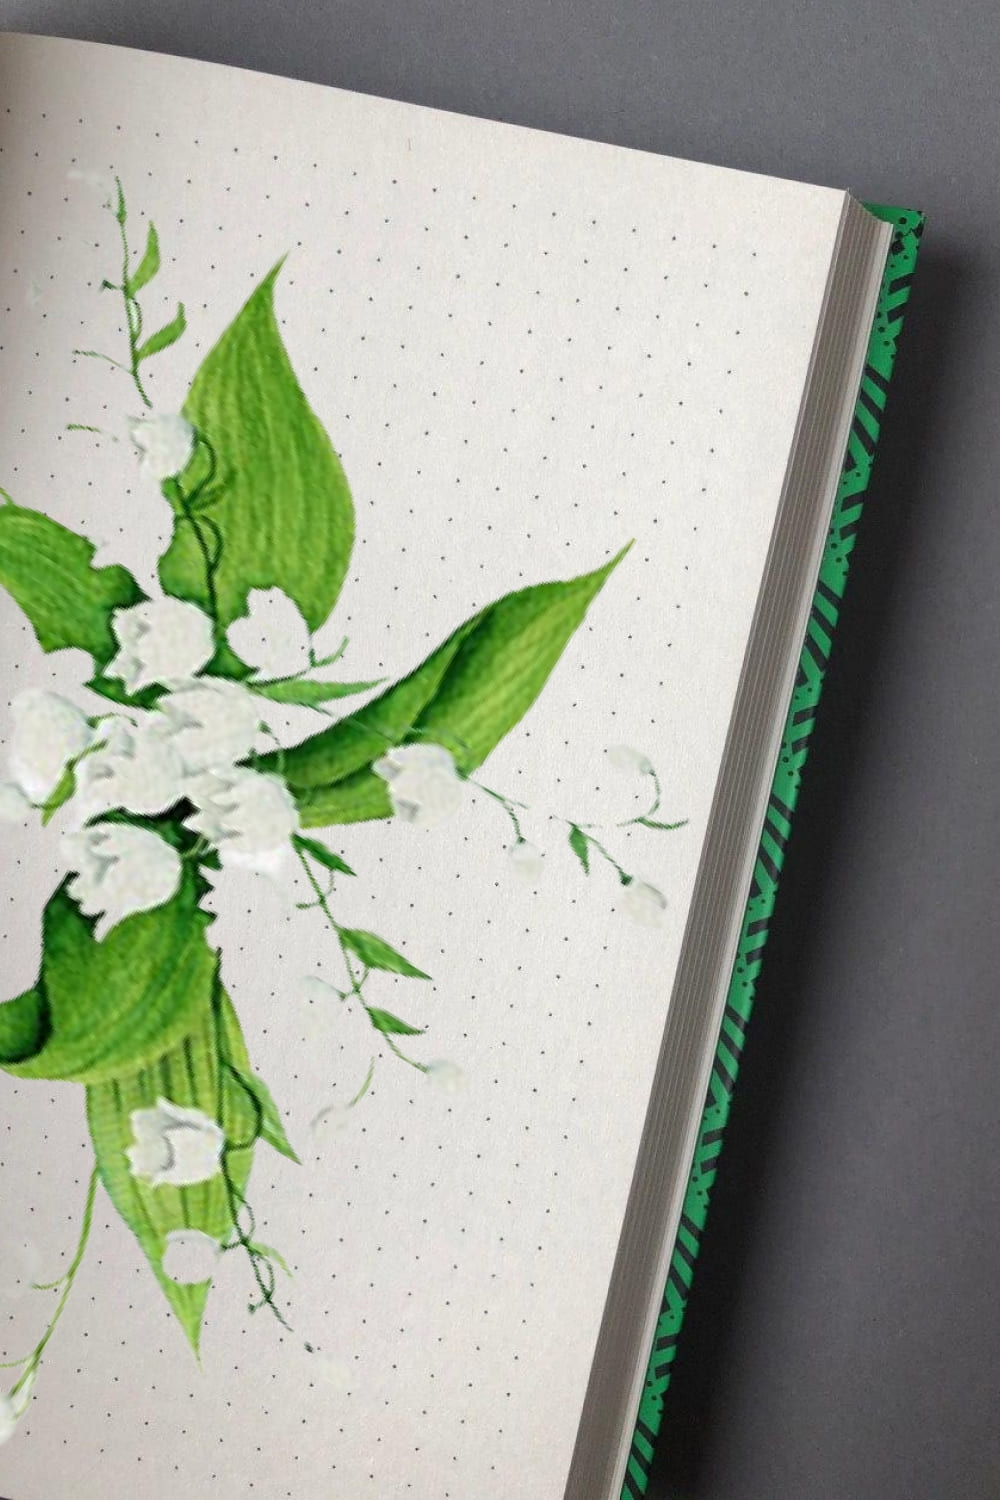 Gorgeous hand-drawn floral lily art illustrations.